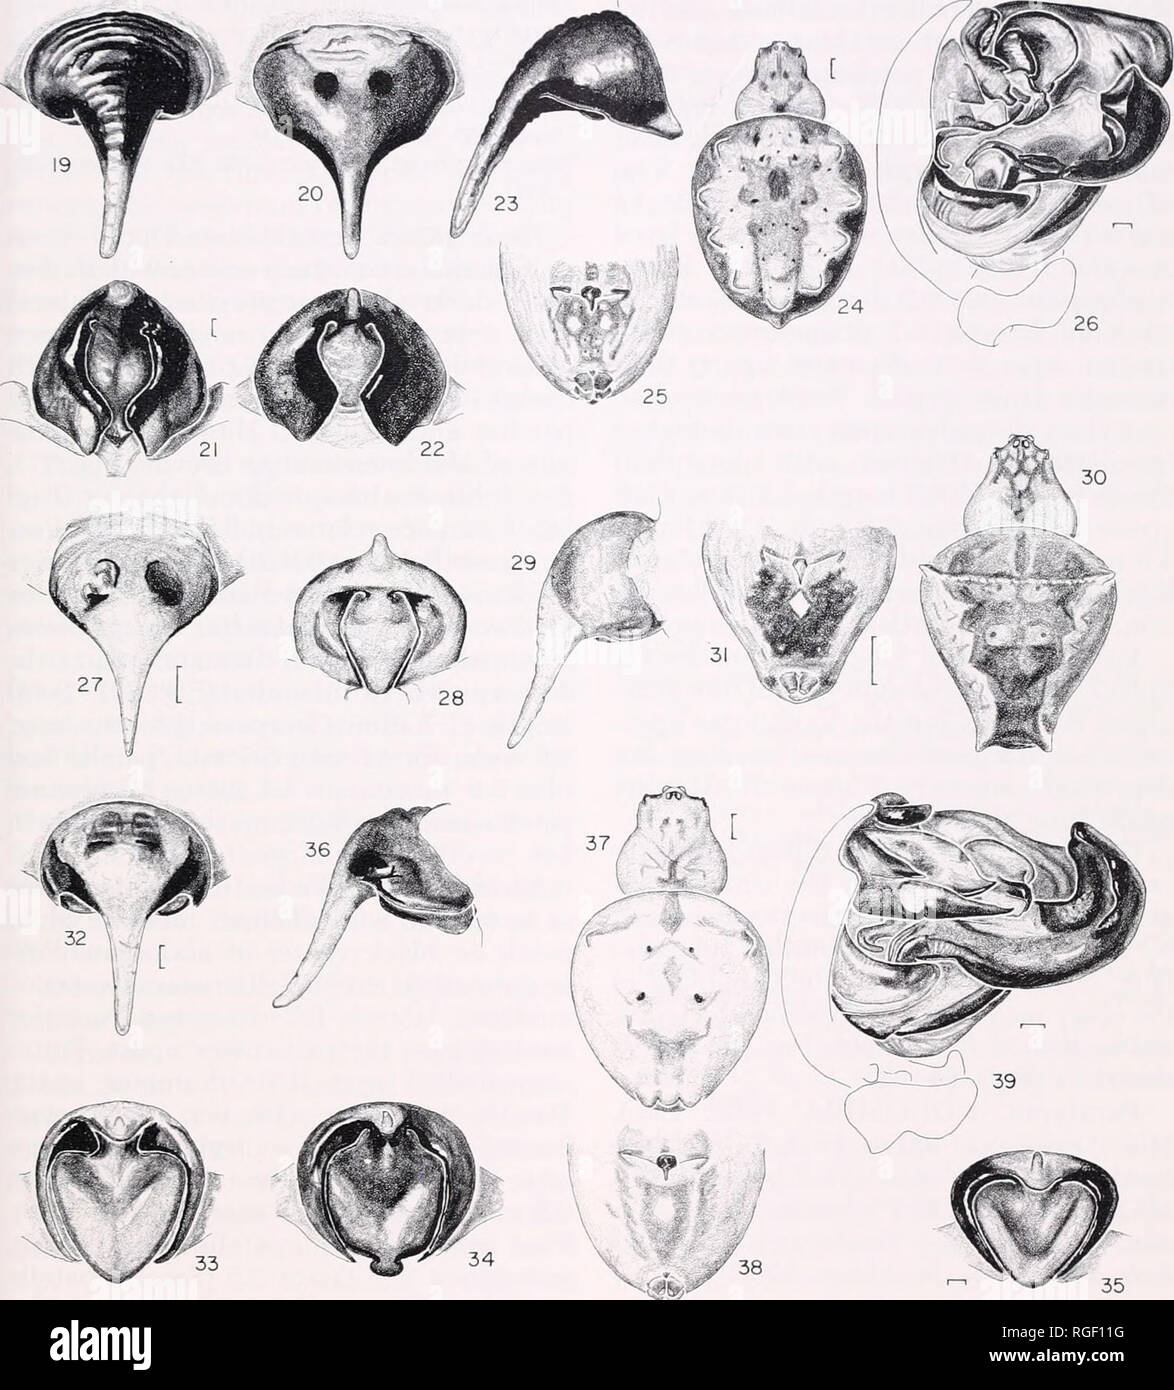 . Bulletin of the Museum of Comparative Zoology at Harvard College. Zoology. Parawixia • Levi 15. Figures 19-26. Parawixia destricta (O. P.-Cambridge). 19-25, female. 19-23, epigynum. 19, 20, ventral. 21, 22, posterior. 23, lateral. 24, dorsal. 25, abdomen, ventral. 19, 21, 23, (Guatemala). 20, 22, (Chiapas). 26, left male palpus. Figures 27-31. P. barbacoas n. sp., female. 27-29, epigynum. 27, ventral. 28, posterior. 29, lateral. 30, dorsal. 31, abdomen, ventral. Figures 32-39. P. rimosa (Keyserling). 32-38, female. 32-36, epigynum. 32, ventral. 33-35, posterior. 36, lateral. 32, 33, 36, (syn Stock Photo